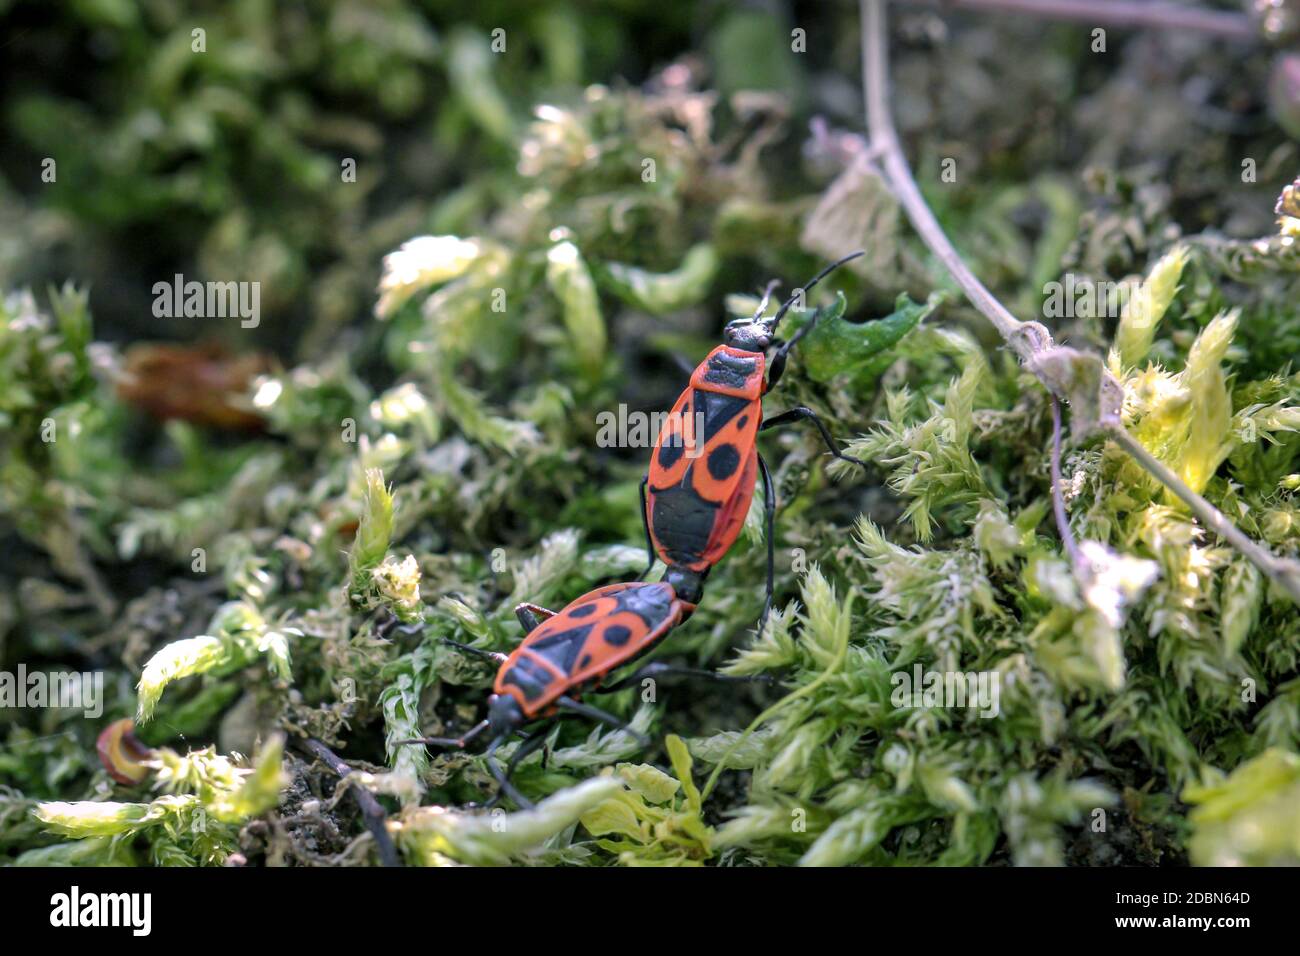 Two firebugs mating on a plant. Stock Photo